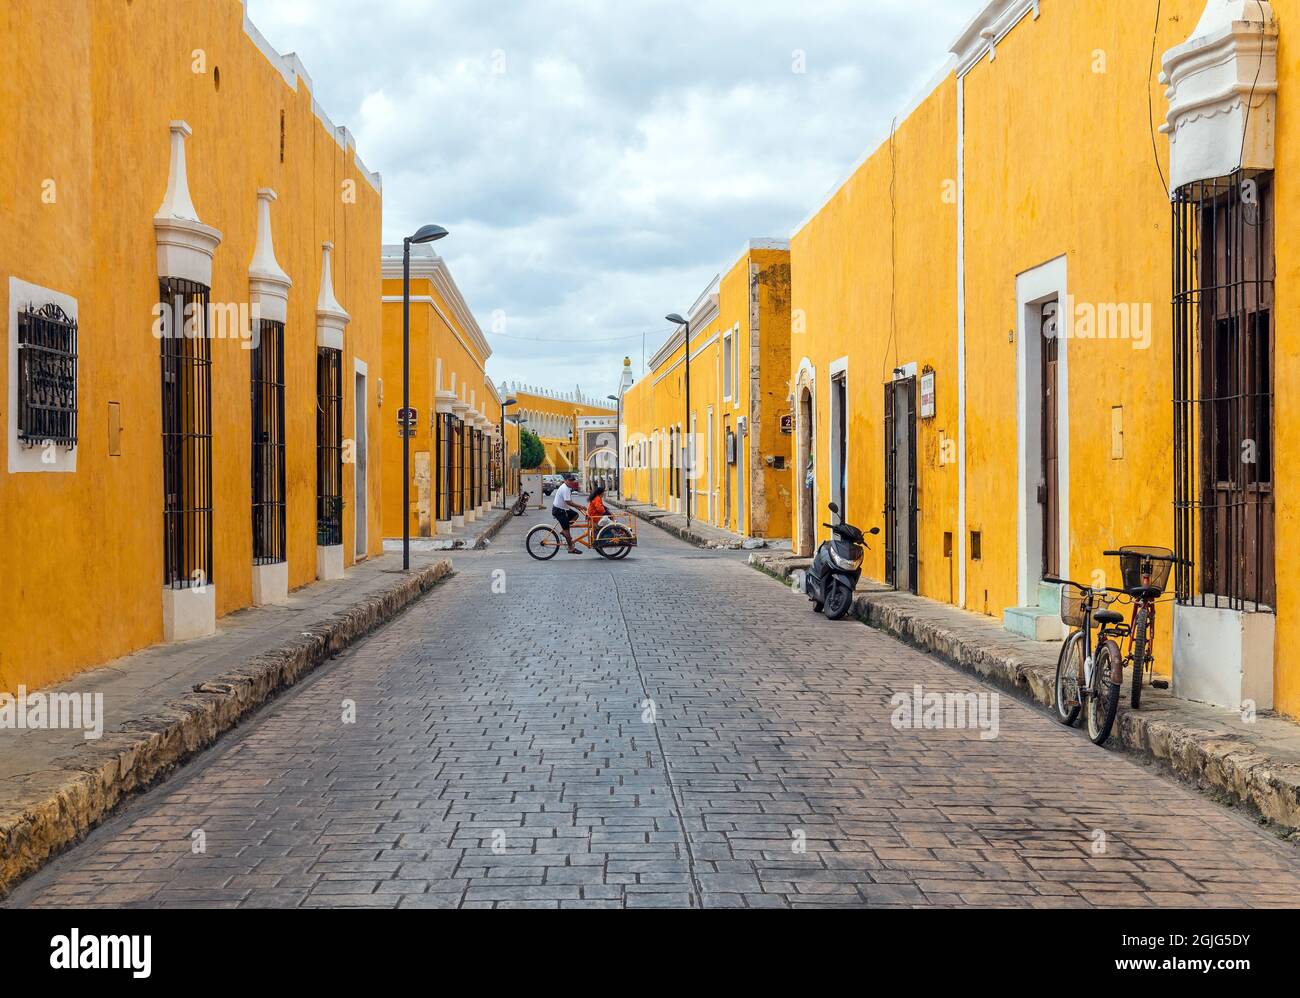 Mexican tricycle cab driver with passenger driving through the streets of the yellow city Izamal with colonial style architecture, Izamal, Mexico. Stock Photo